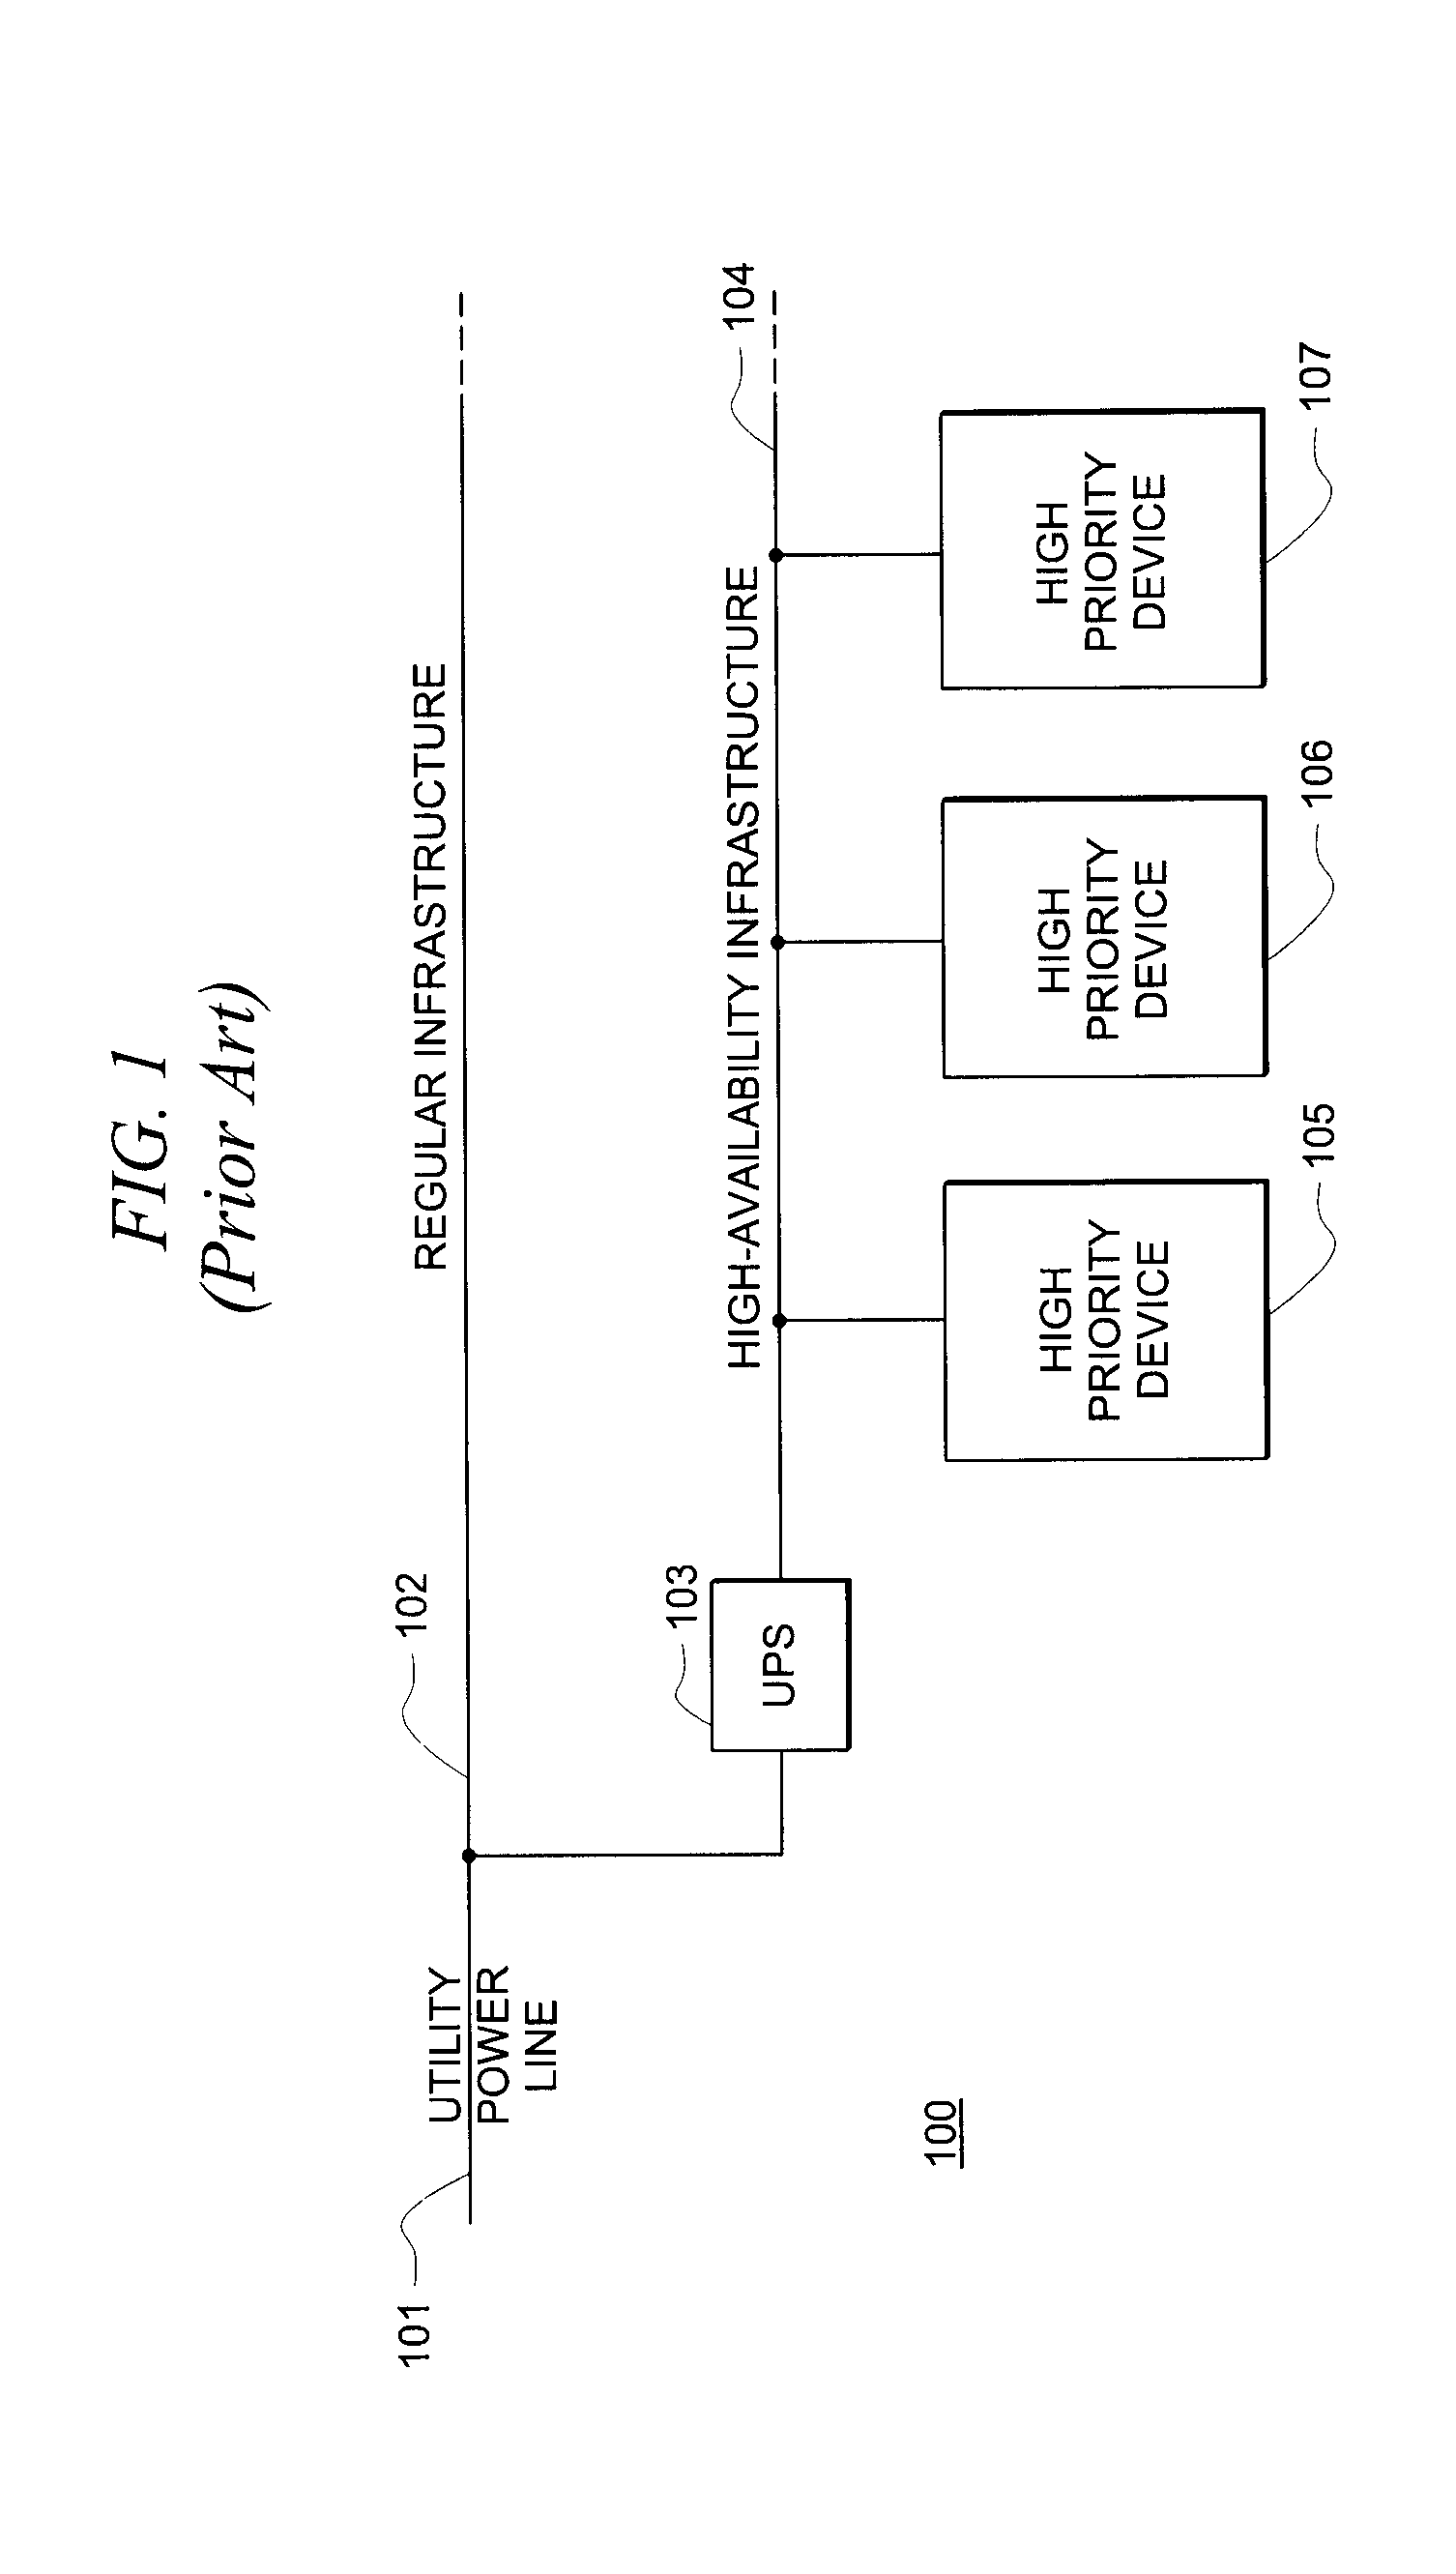 Systems and methods for providing and managing high-availability power infrastructures with flexible load prioritization